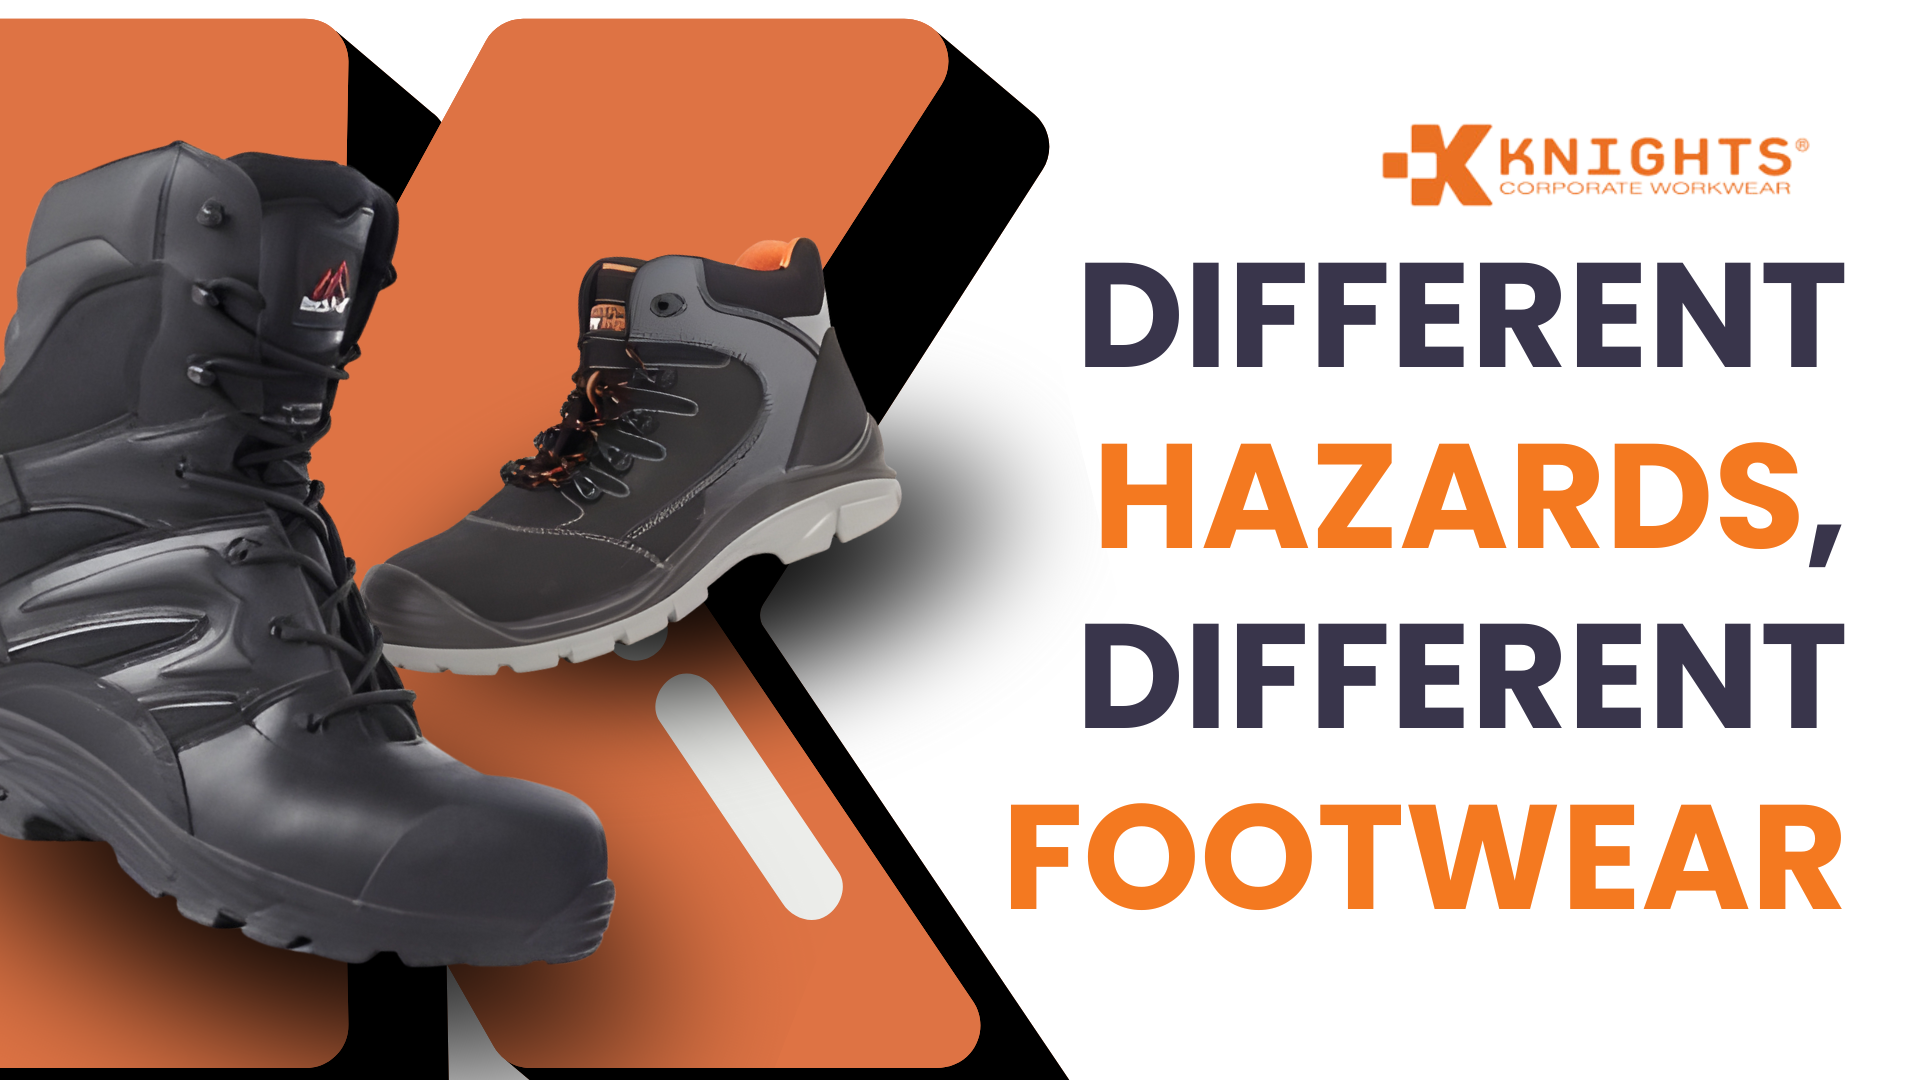 Choosing the right Safety Footwear for Your job